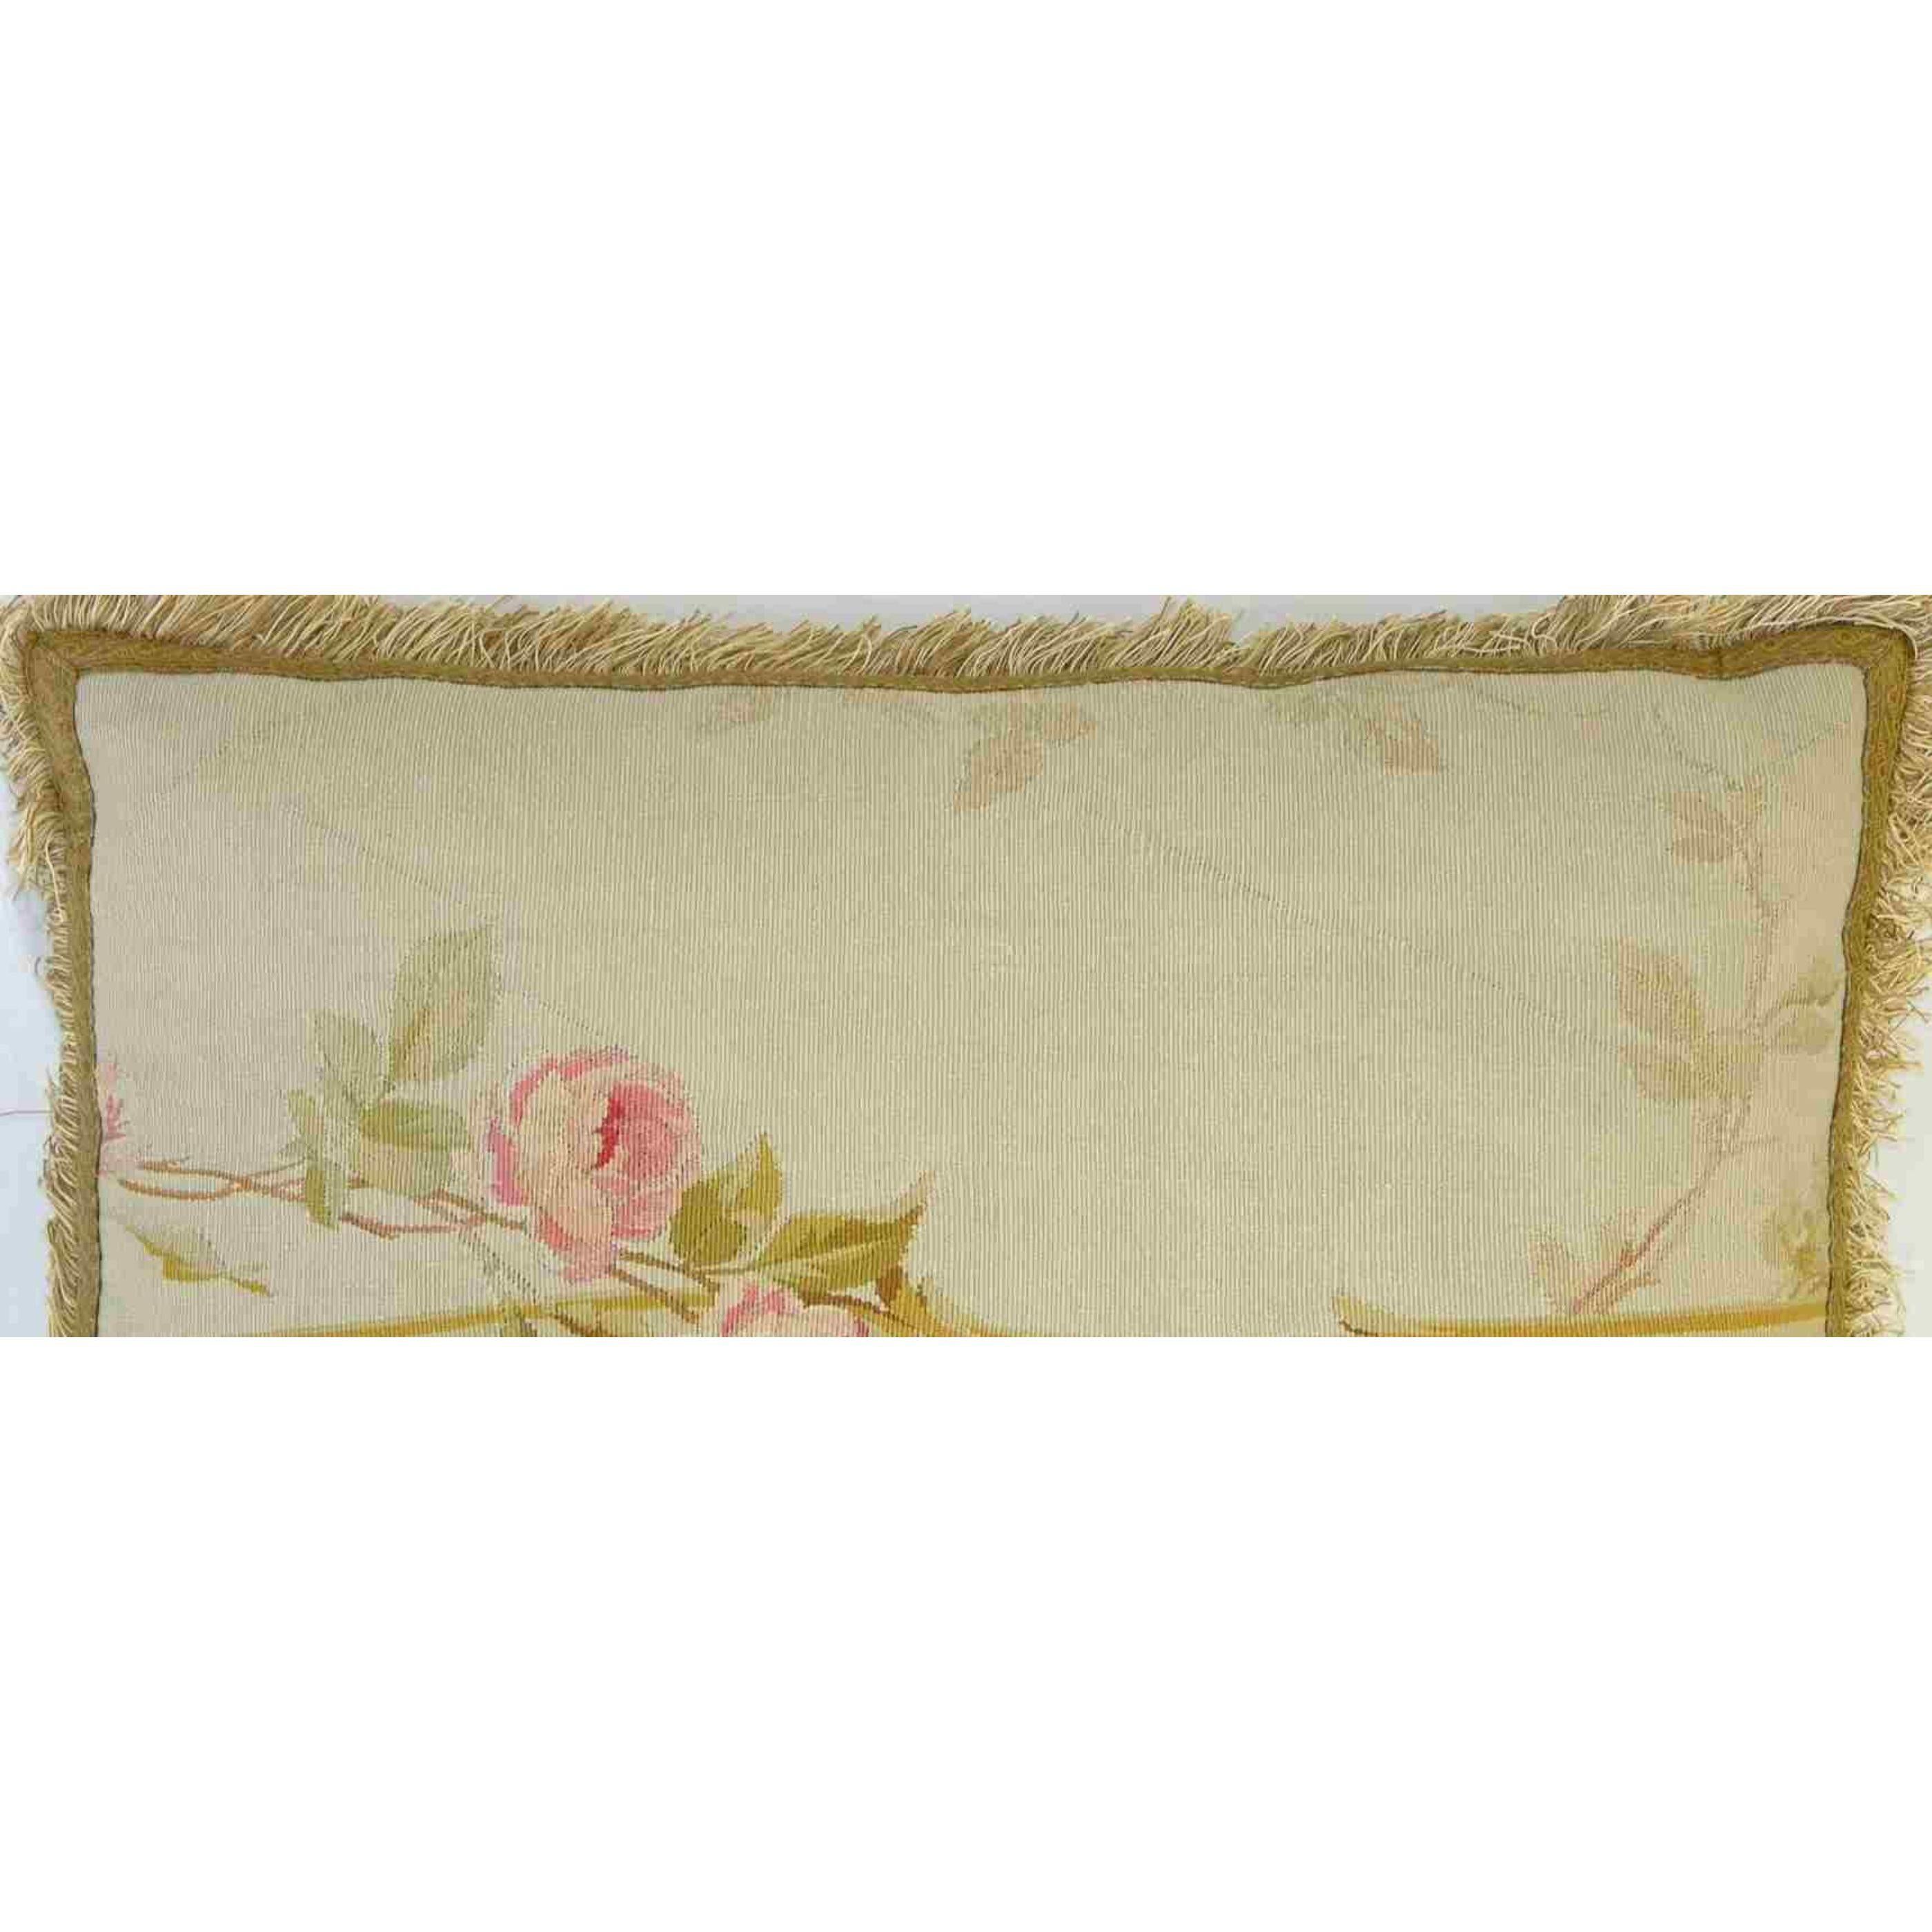 Circa 1860 Antique French Aubusson Tapestry Pillow In Good Condition For Sale In Los Angeles, US